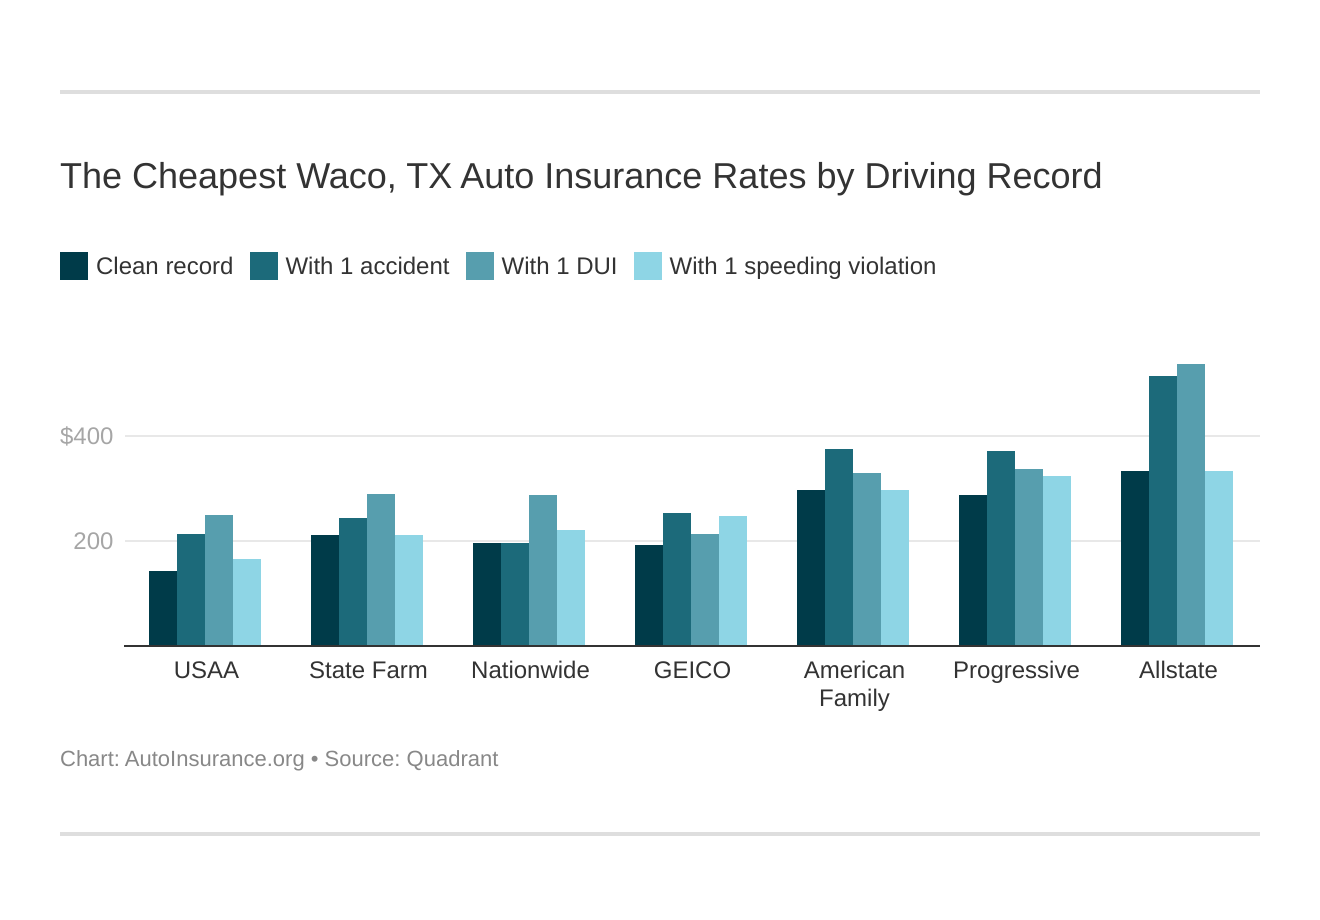 The Cheapest Waco, TX Auto Insurance Rates by Driving Record